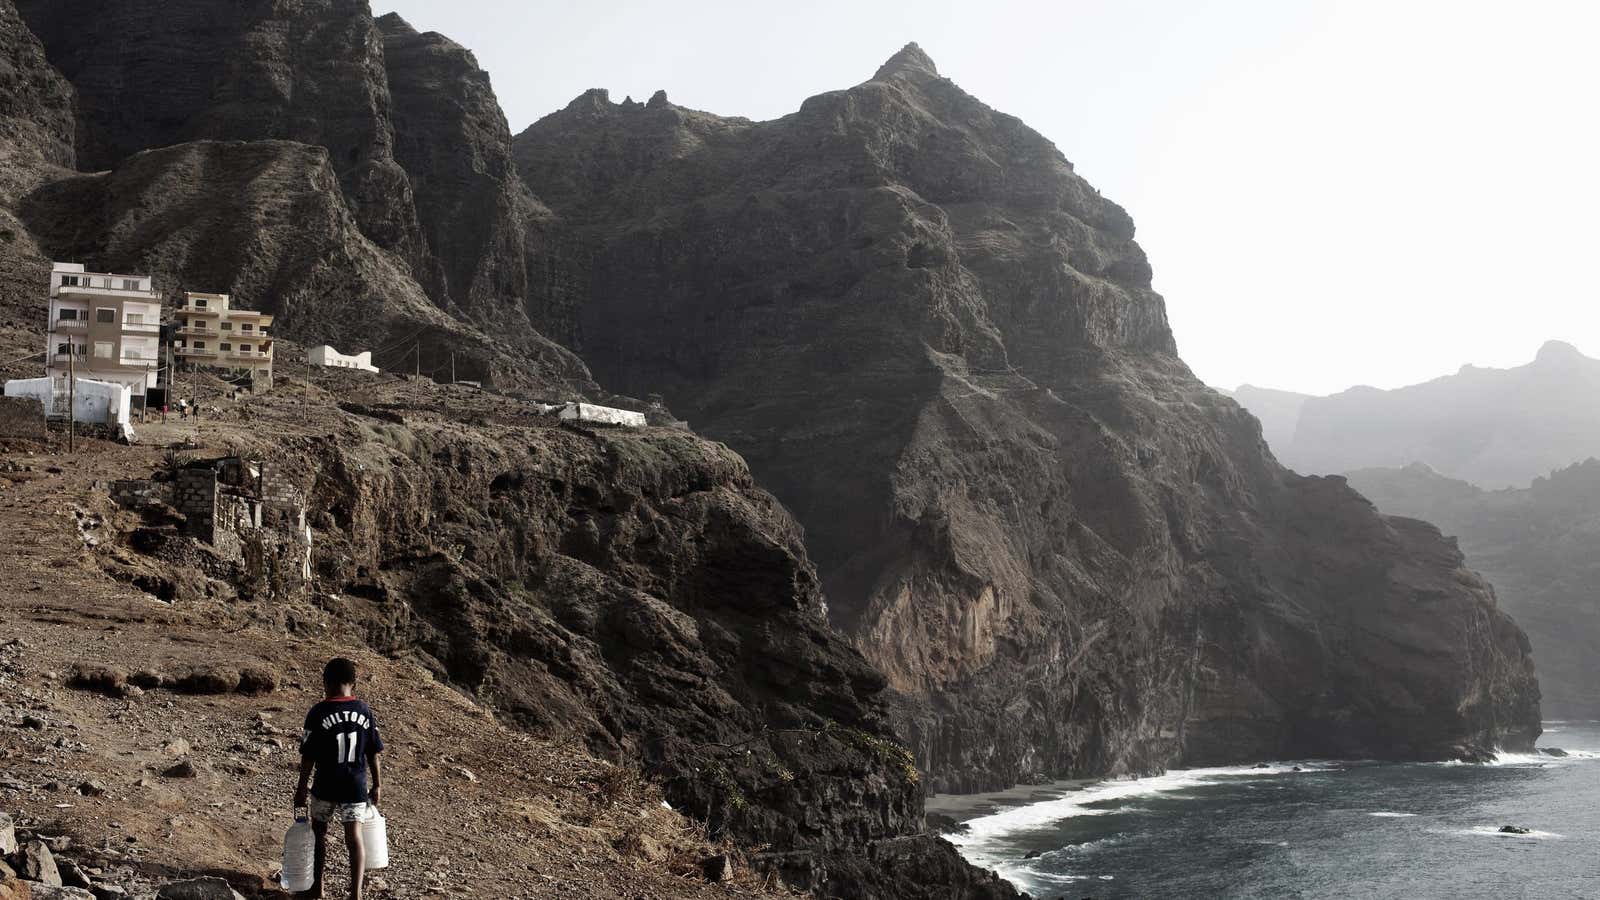 Ponta do Sol on the island of Santo Antao in Cape Verde, off the coast of West Africa.